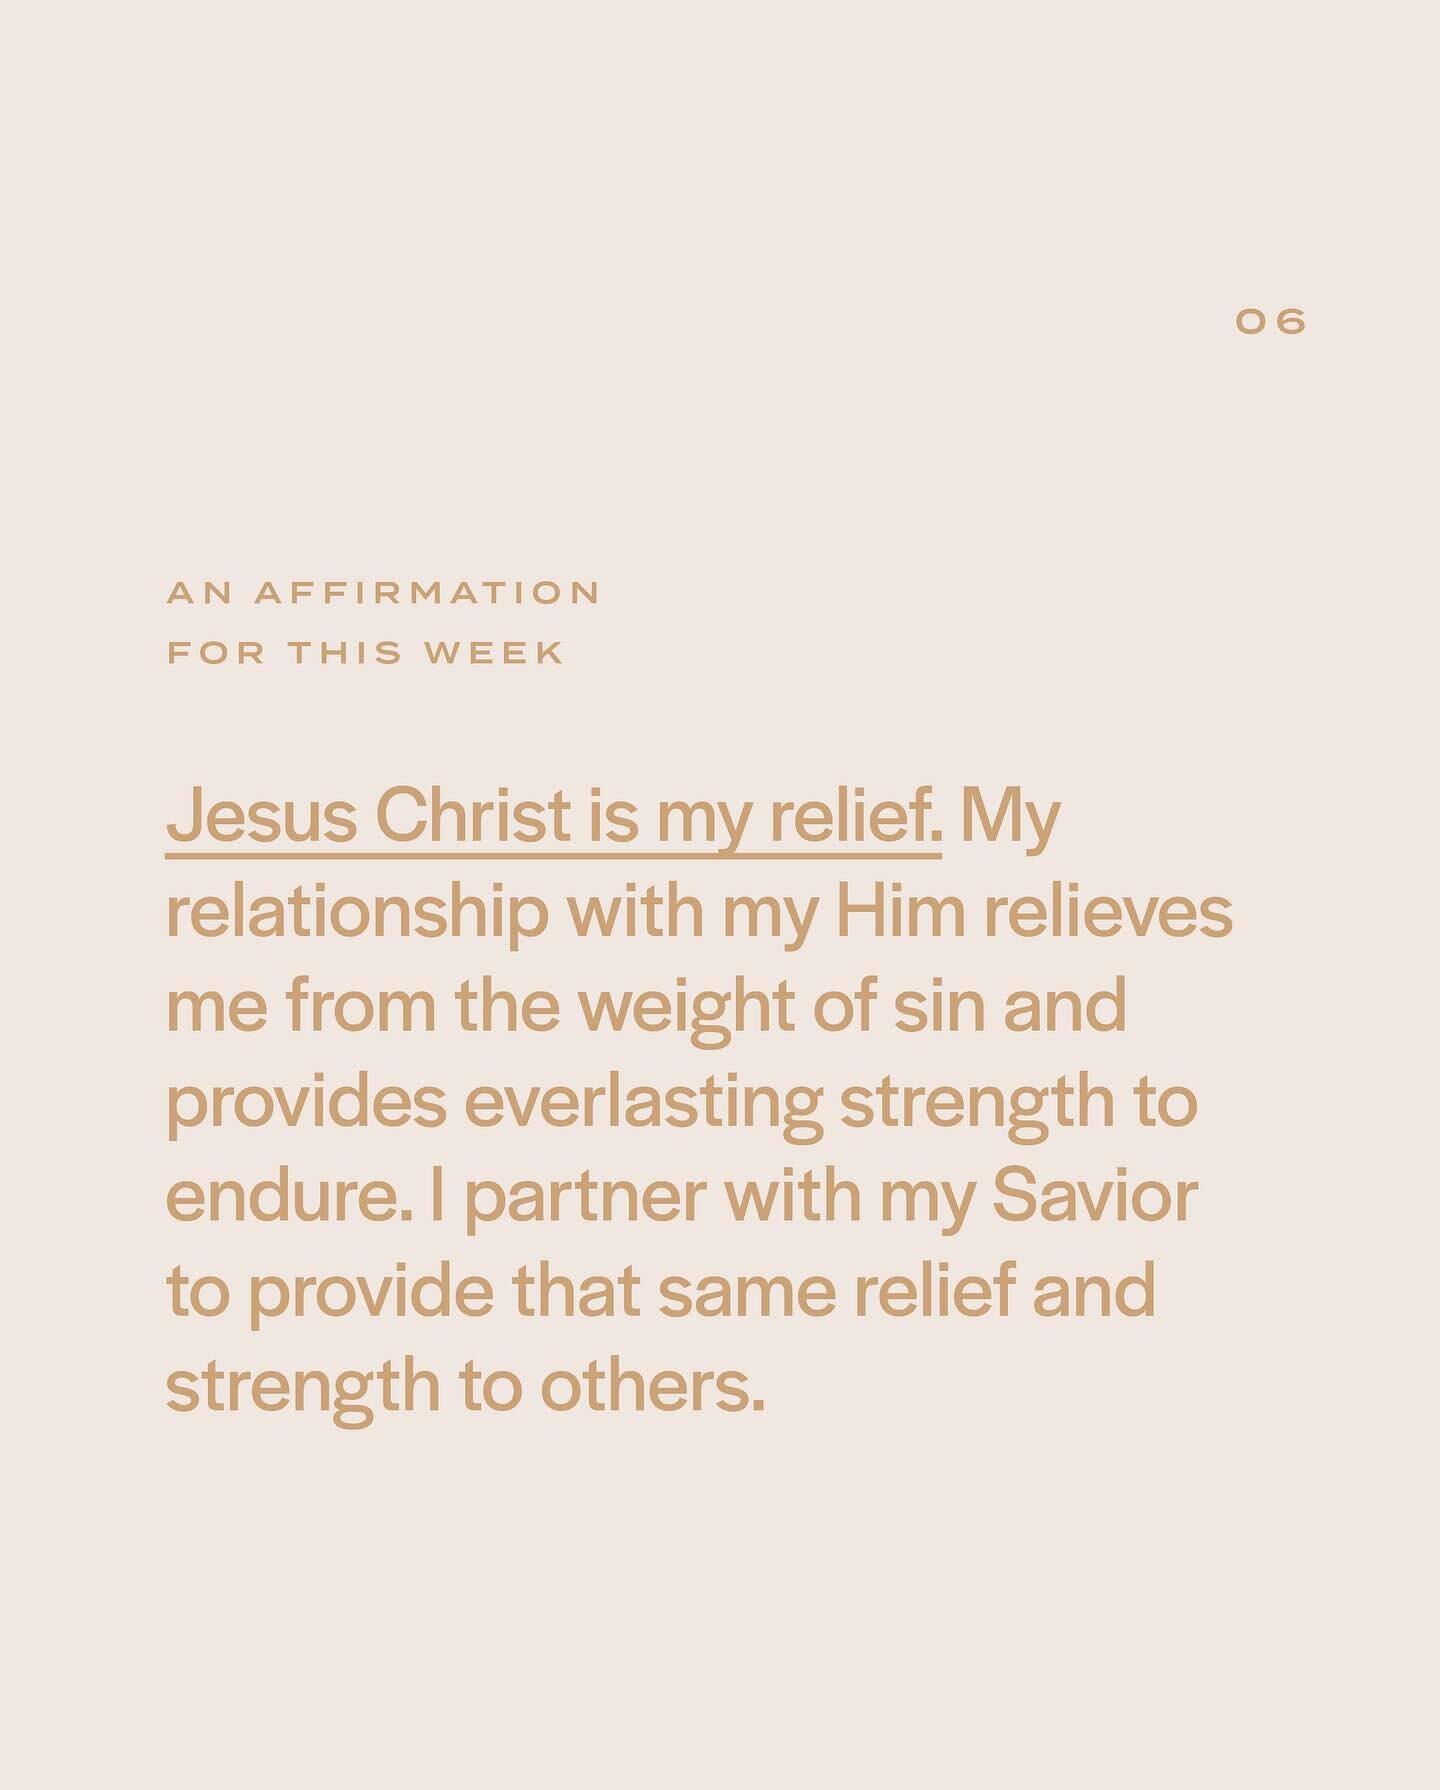 I love the simplicity in this first line&hellip;

In just those few words, so much of our intimate relationship with Him is found.

xo
Rio